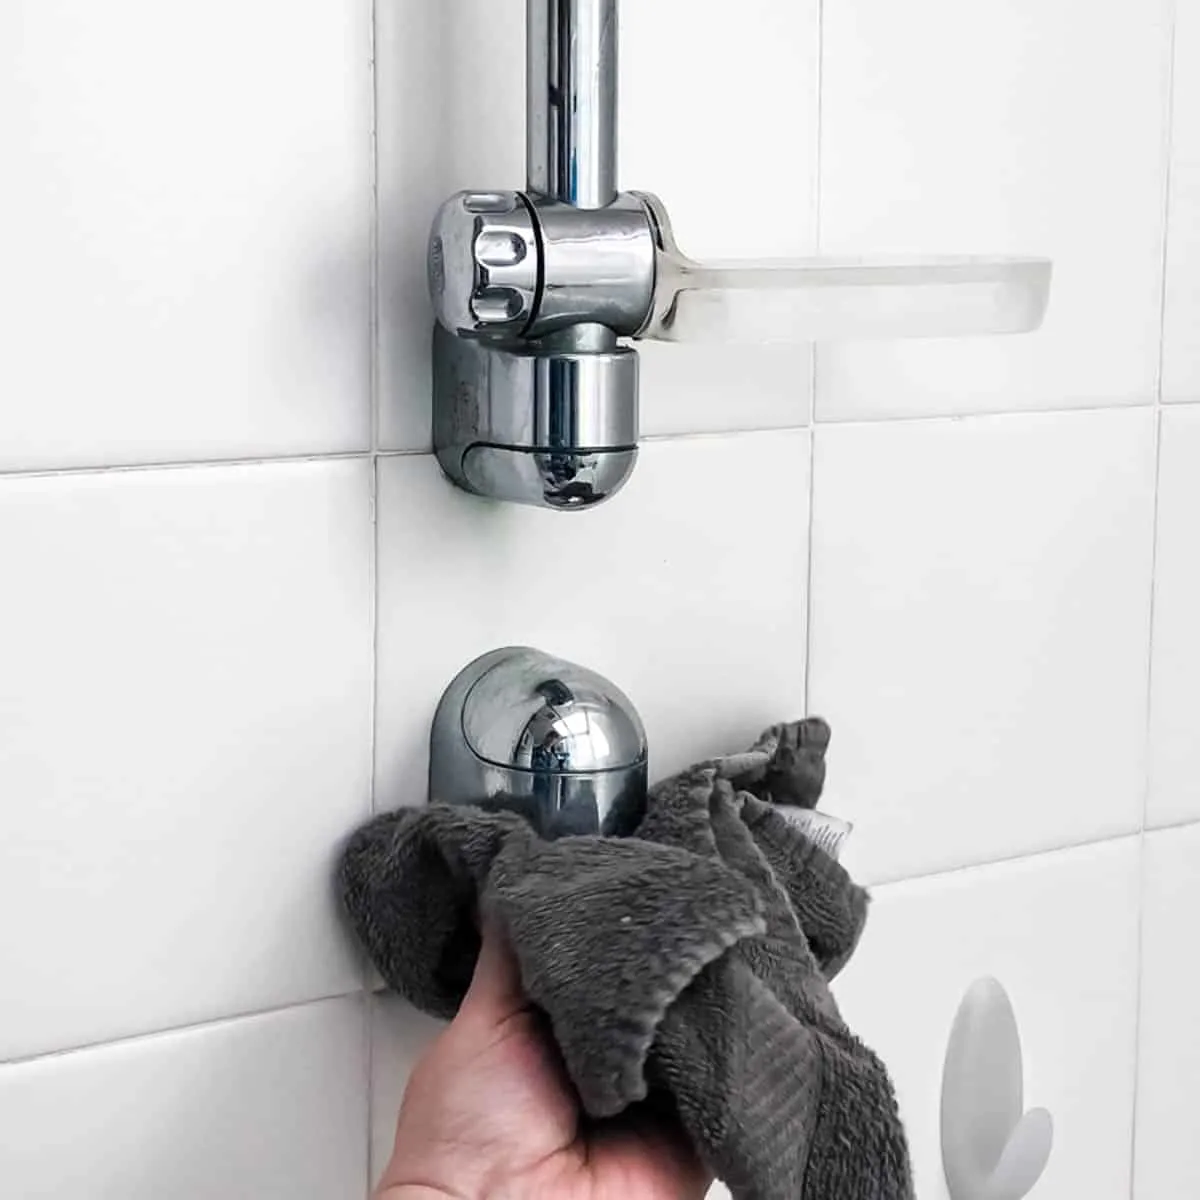 cleaning threads to install new handheld shower head